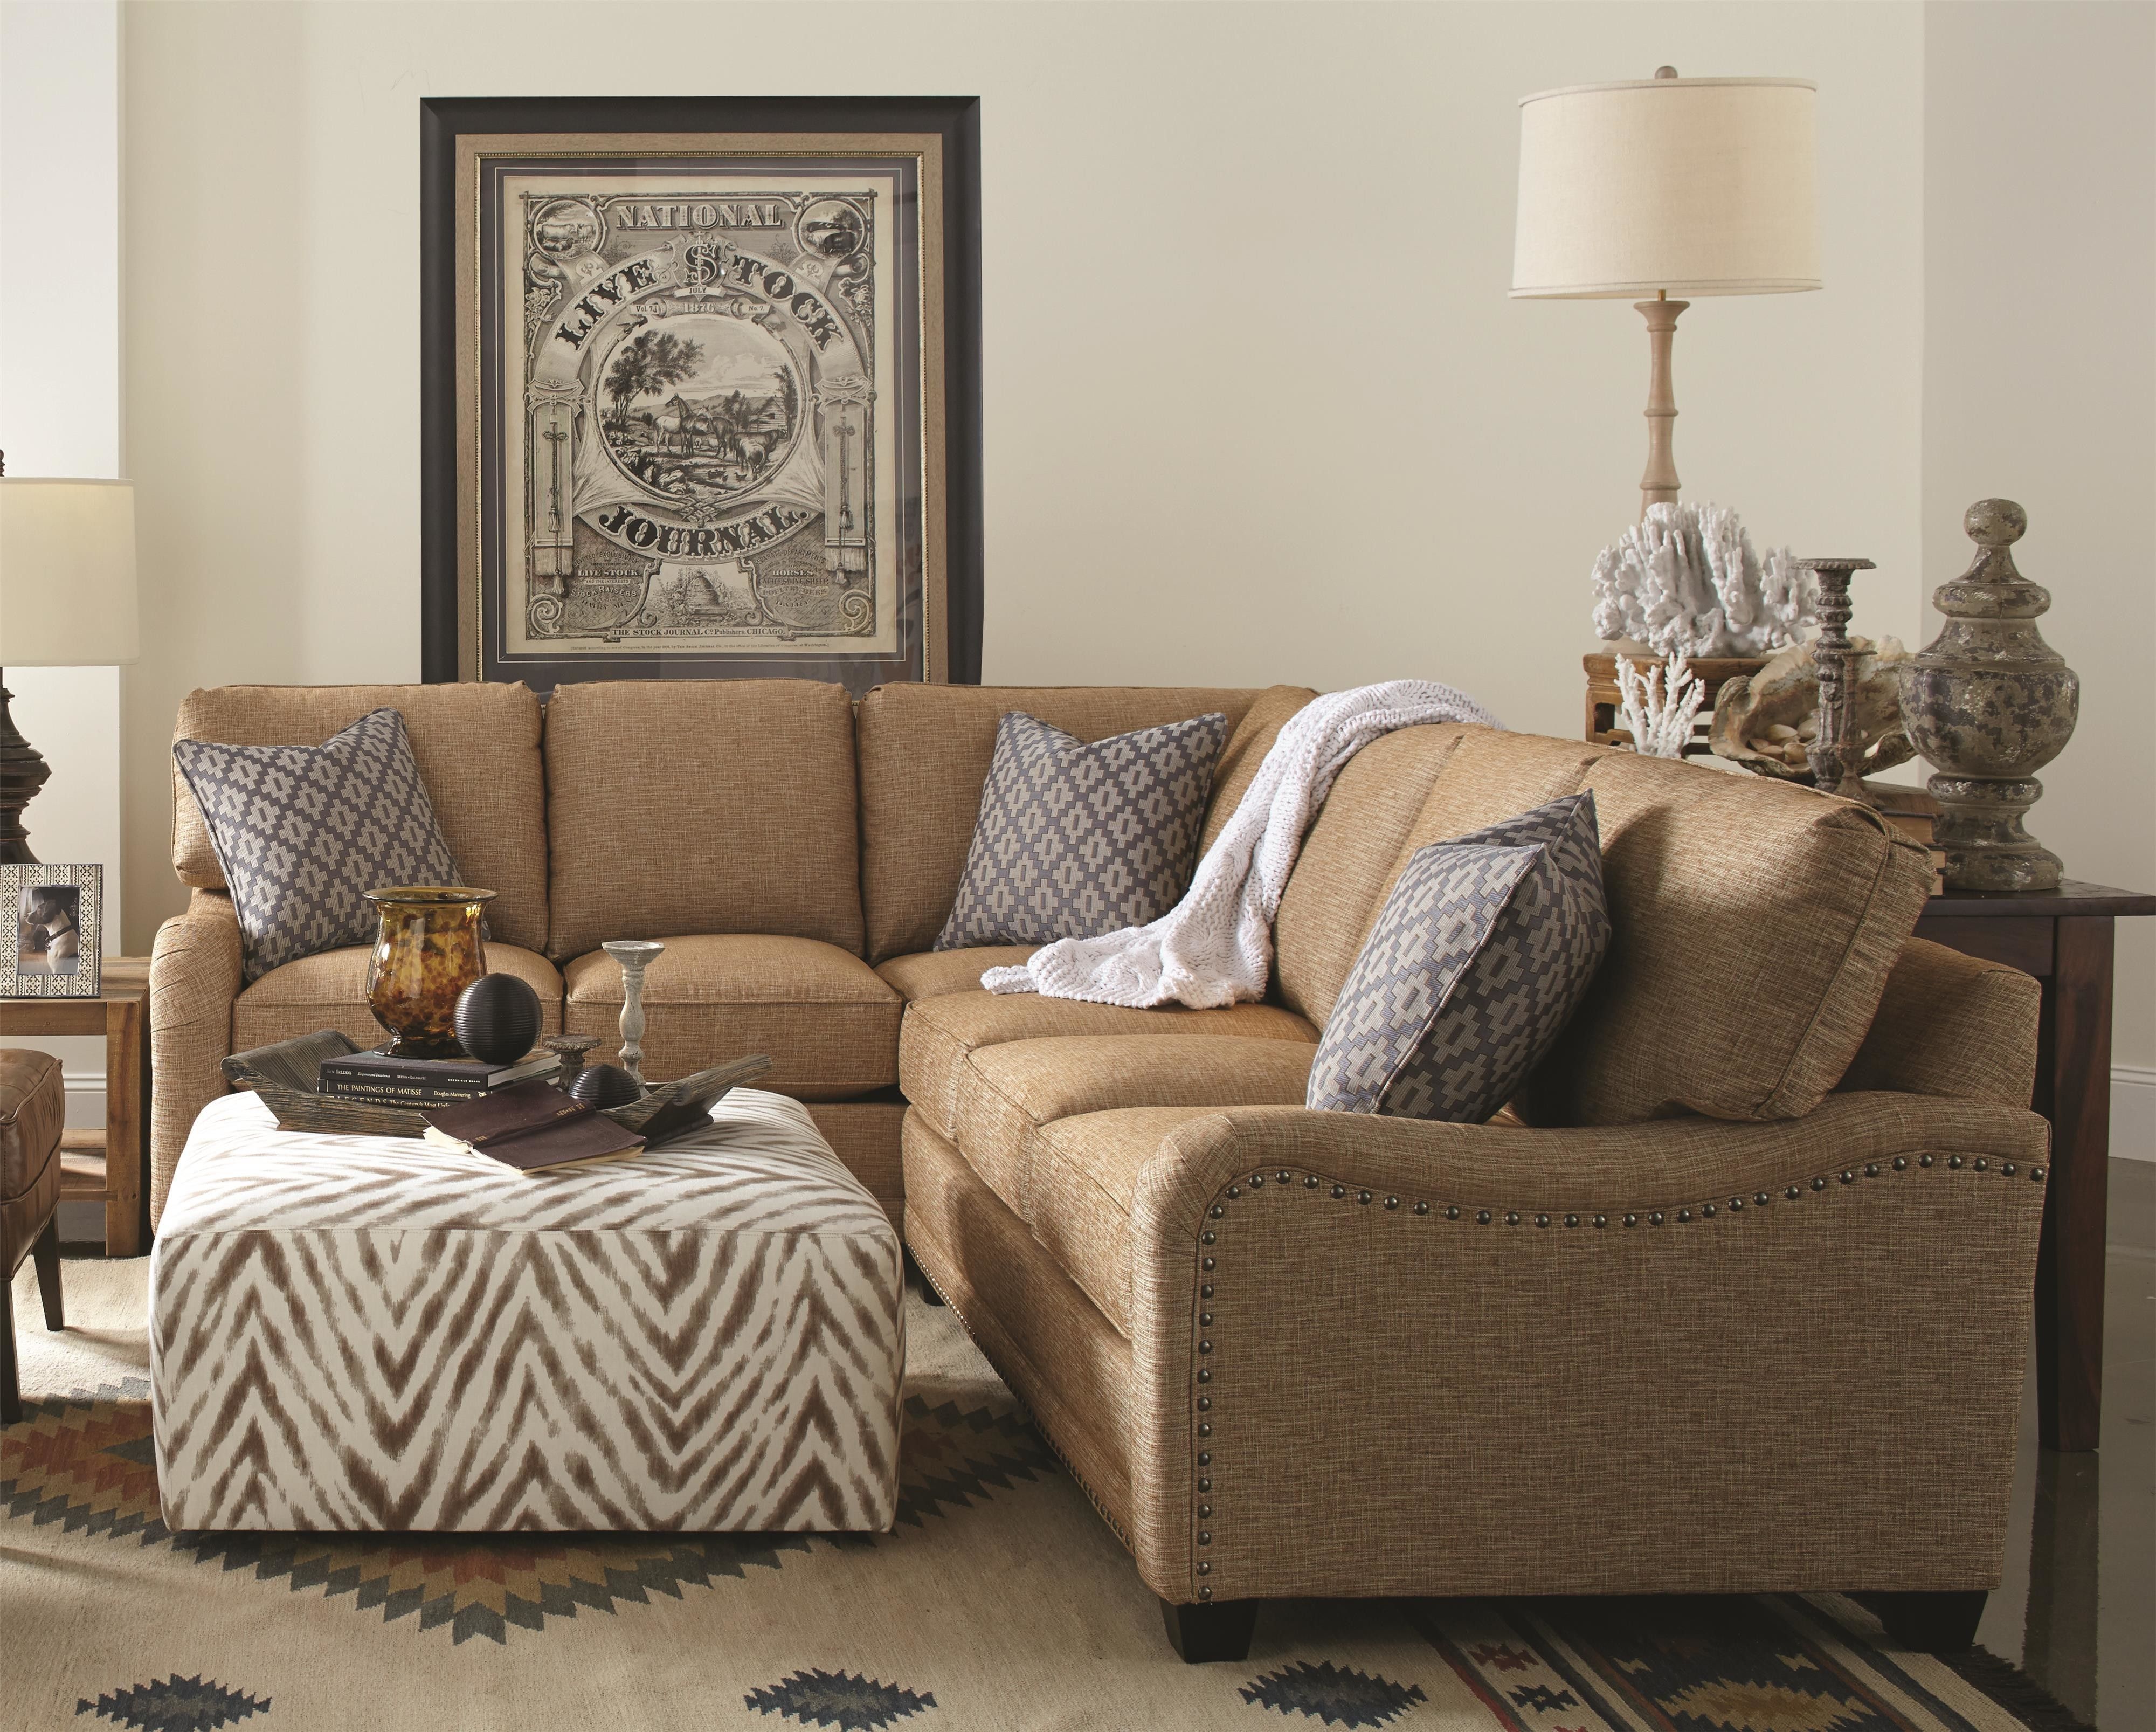 Duluth Furniture Throughout Duluth Mn Sectional Sofas (View 5 of 10)